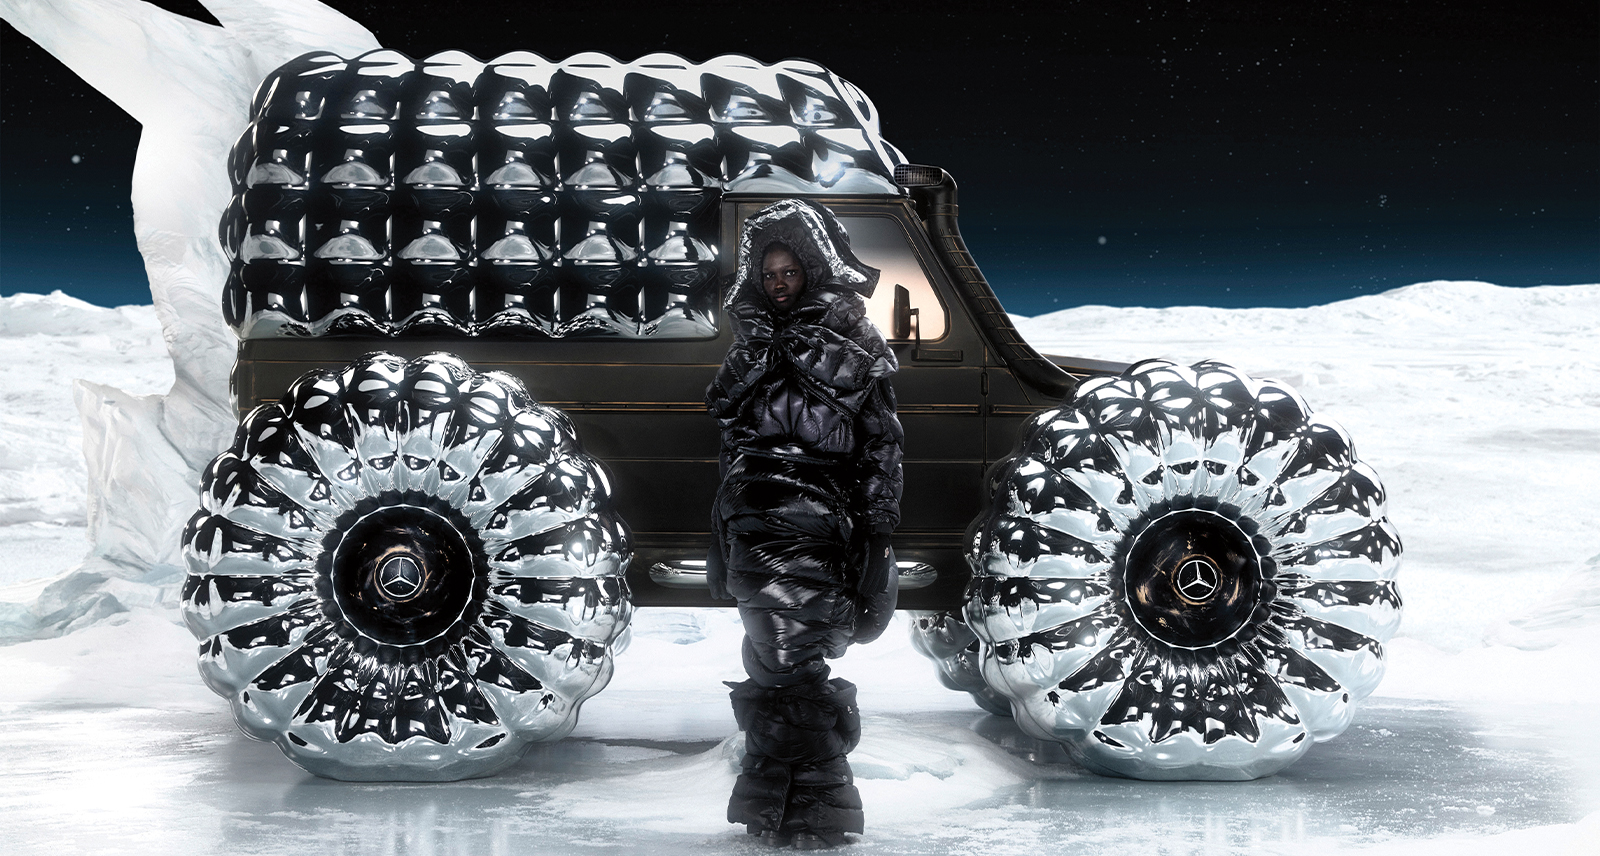 Mercedes-Benz X Moncler Mondo G featured car on snow and black sky background with model in front